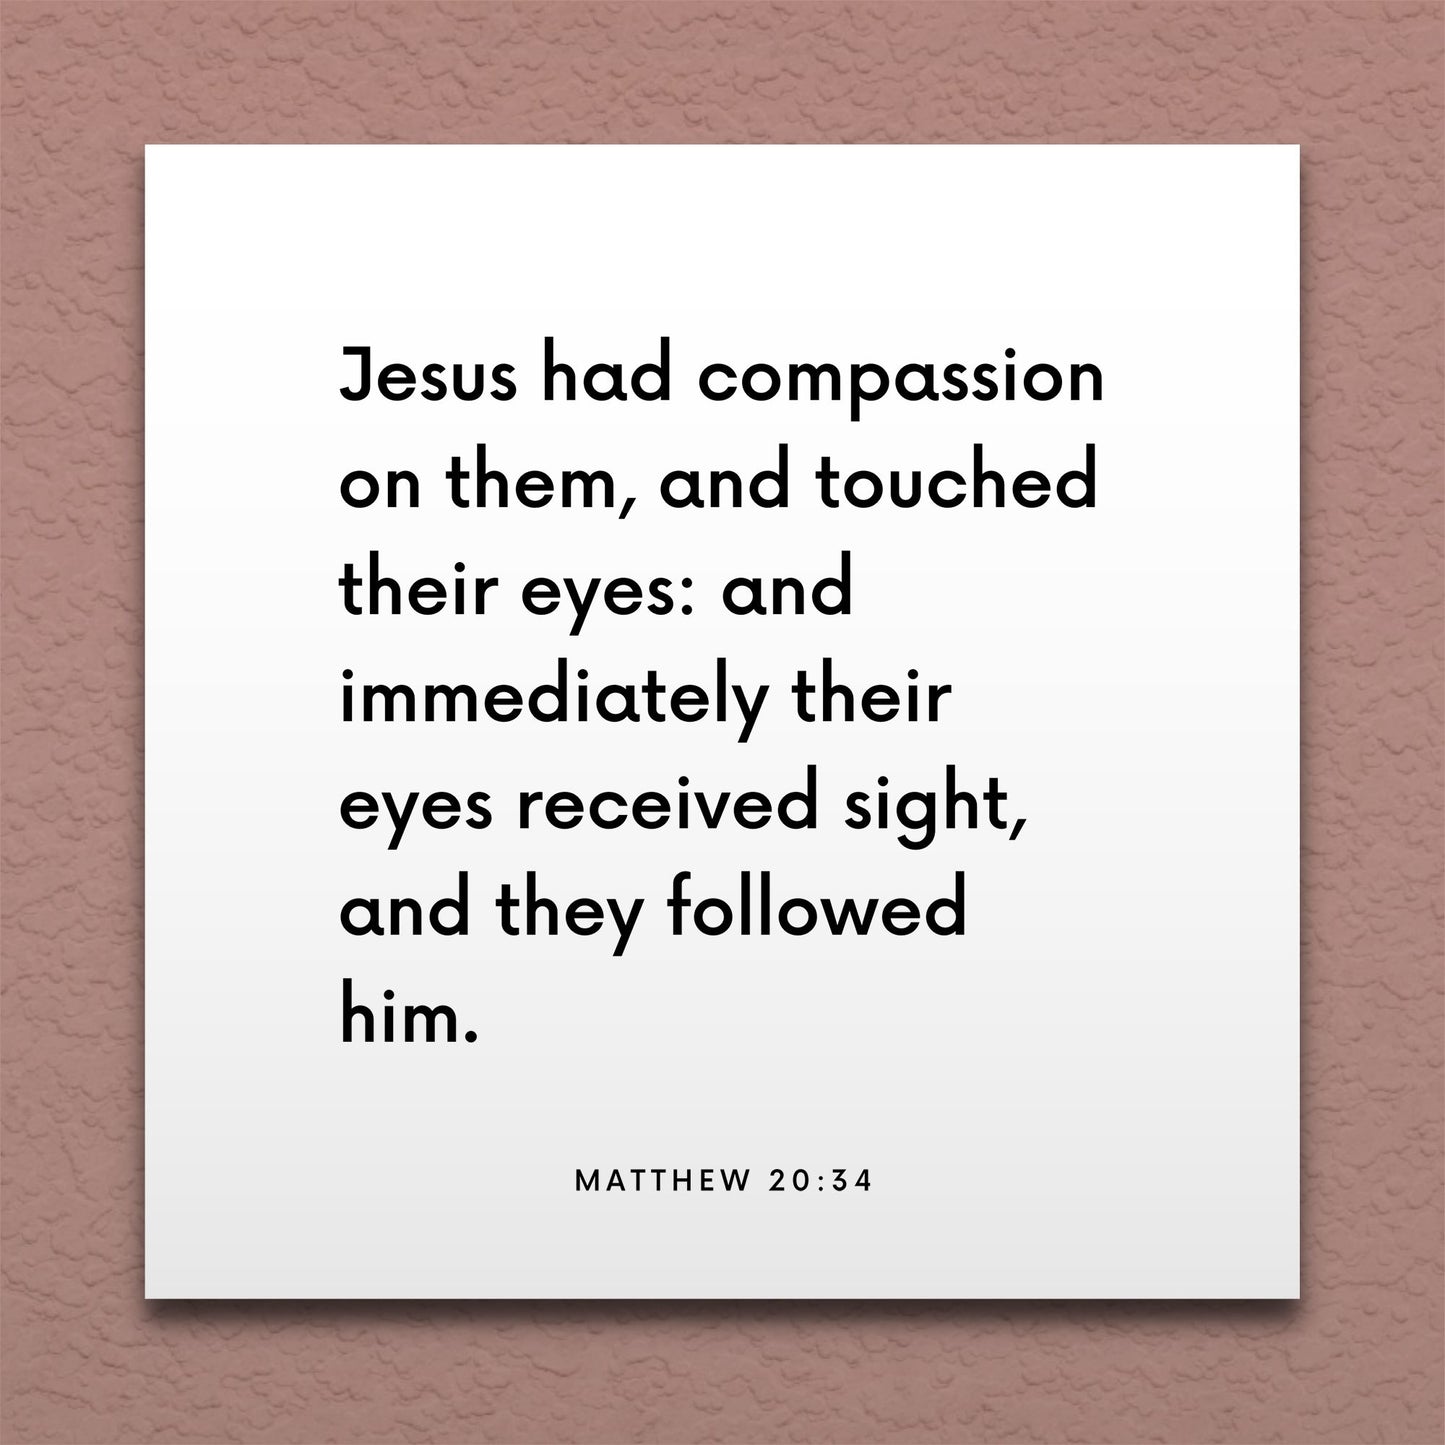 Wall-mounted scripture tile for Matthew 20:34 - "Jesus had compassion on them, and touched their eyes"